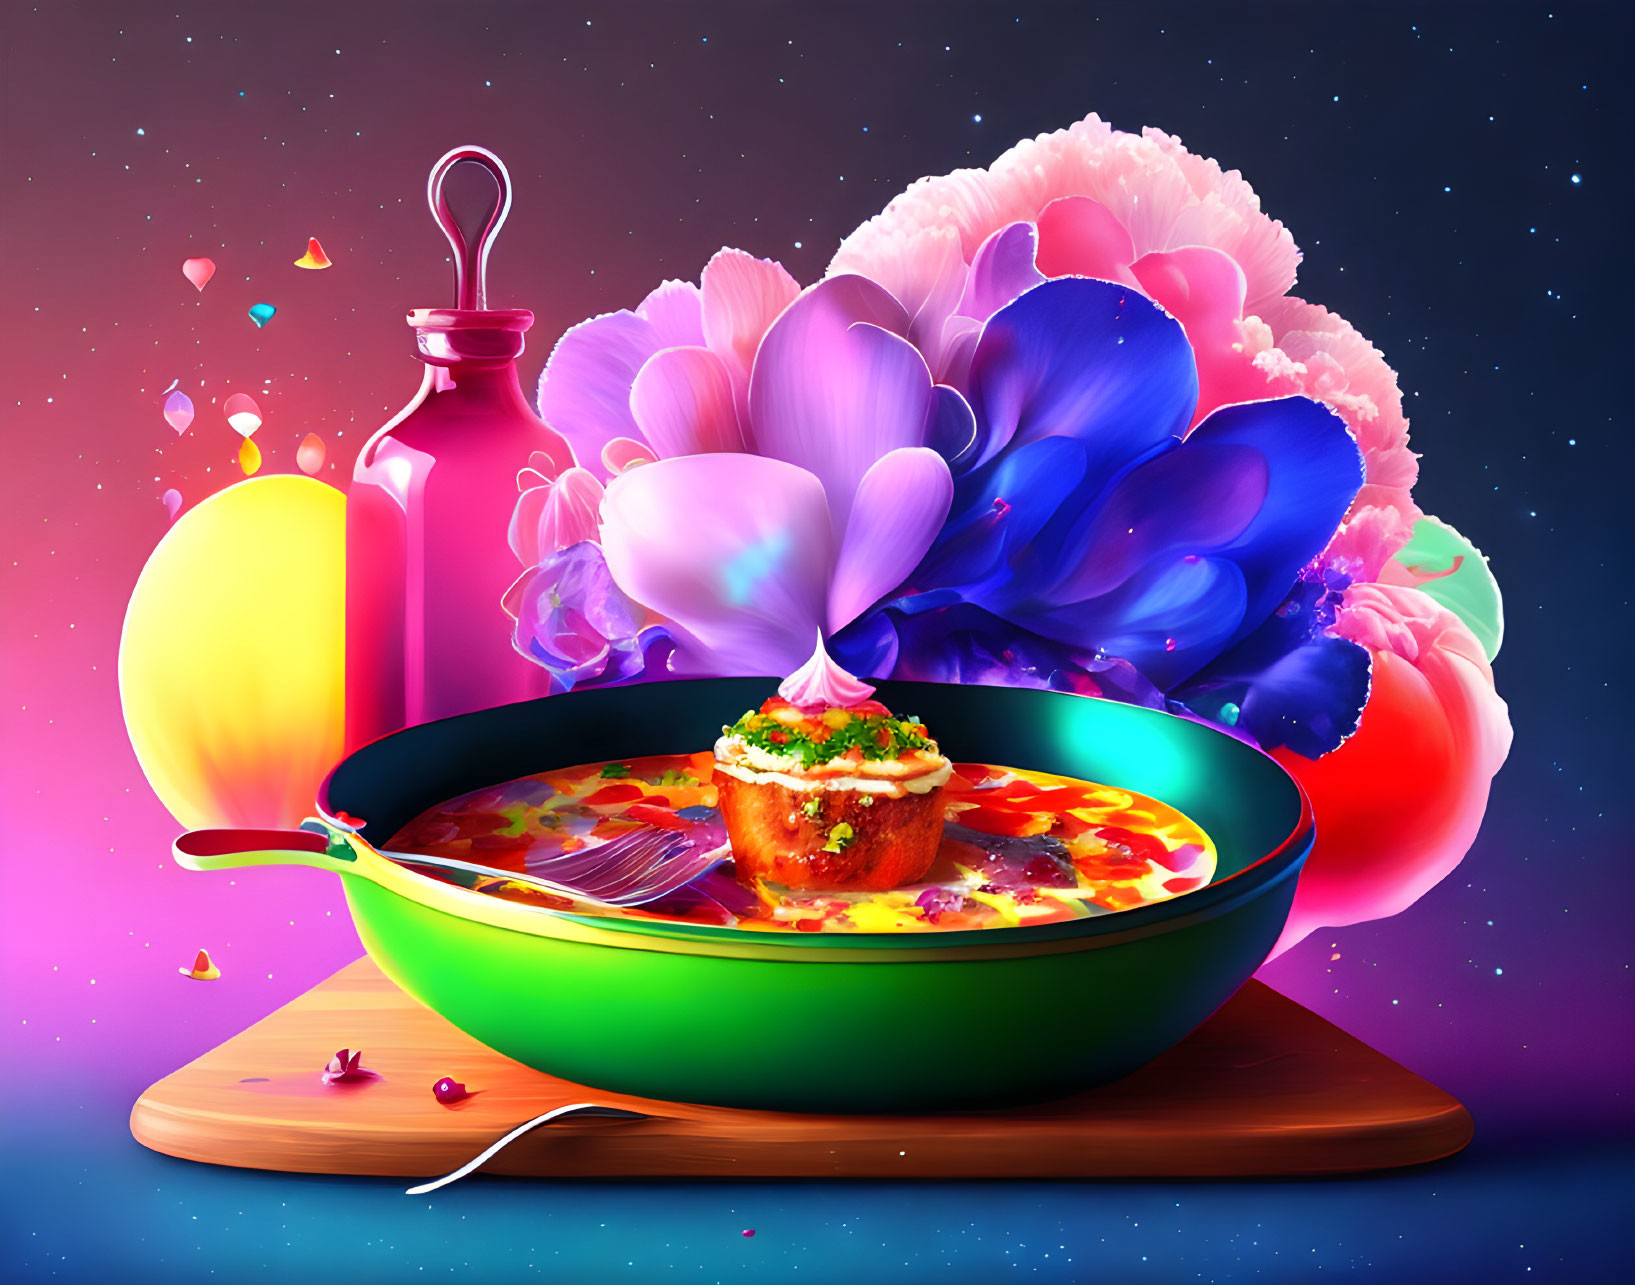 Colorful digital artwork of soup and toast with flowers, fruits, and stars